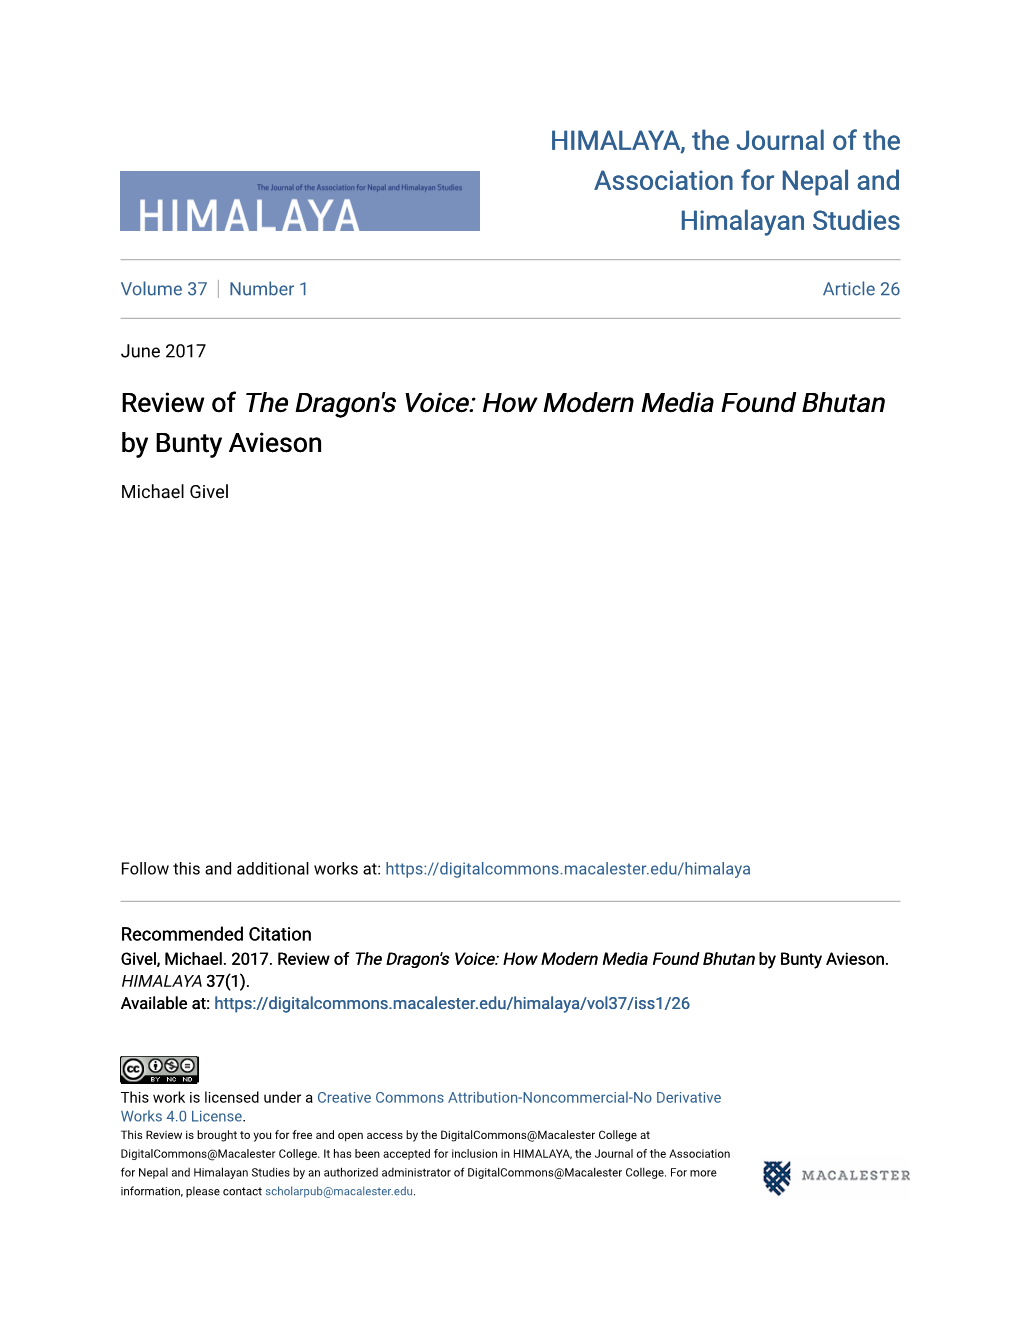 Review of the Dragon's Voice: How Modern Media Found Bhutan by Bunty Avieson